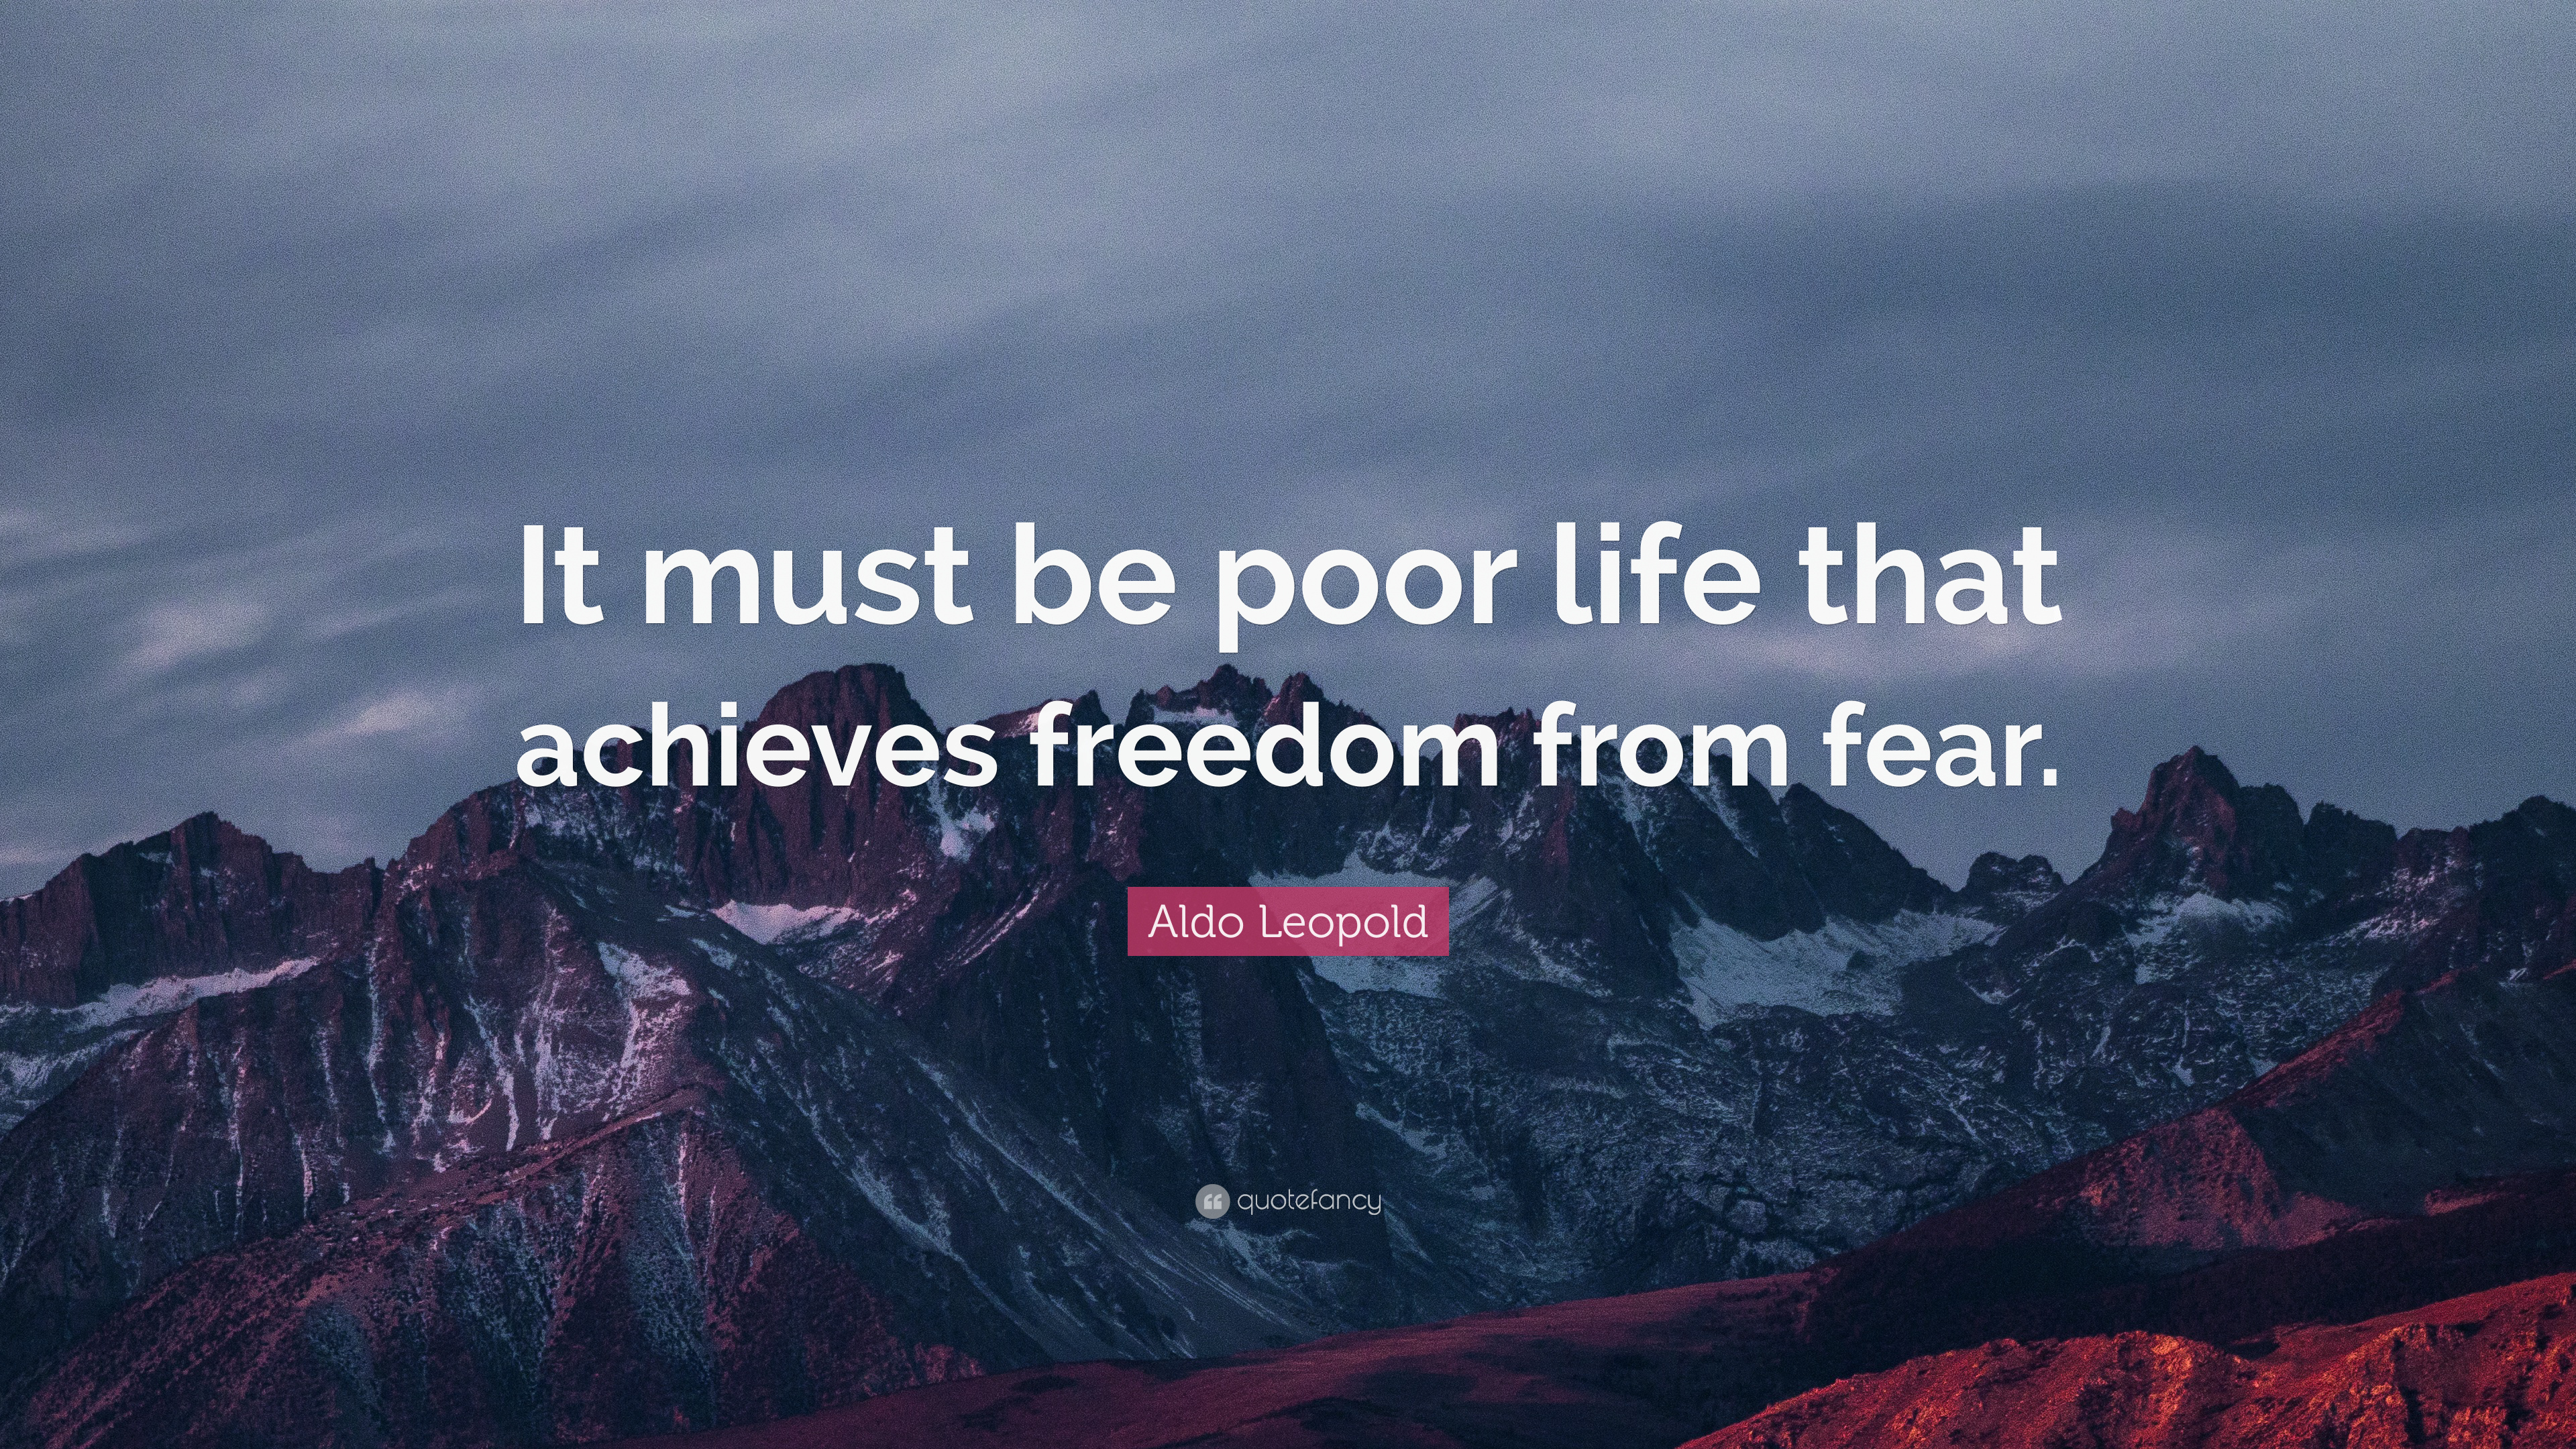 Aldo Leopold Quote: “It must be poor life that achieves freedom from ...